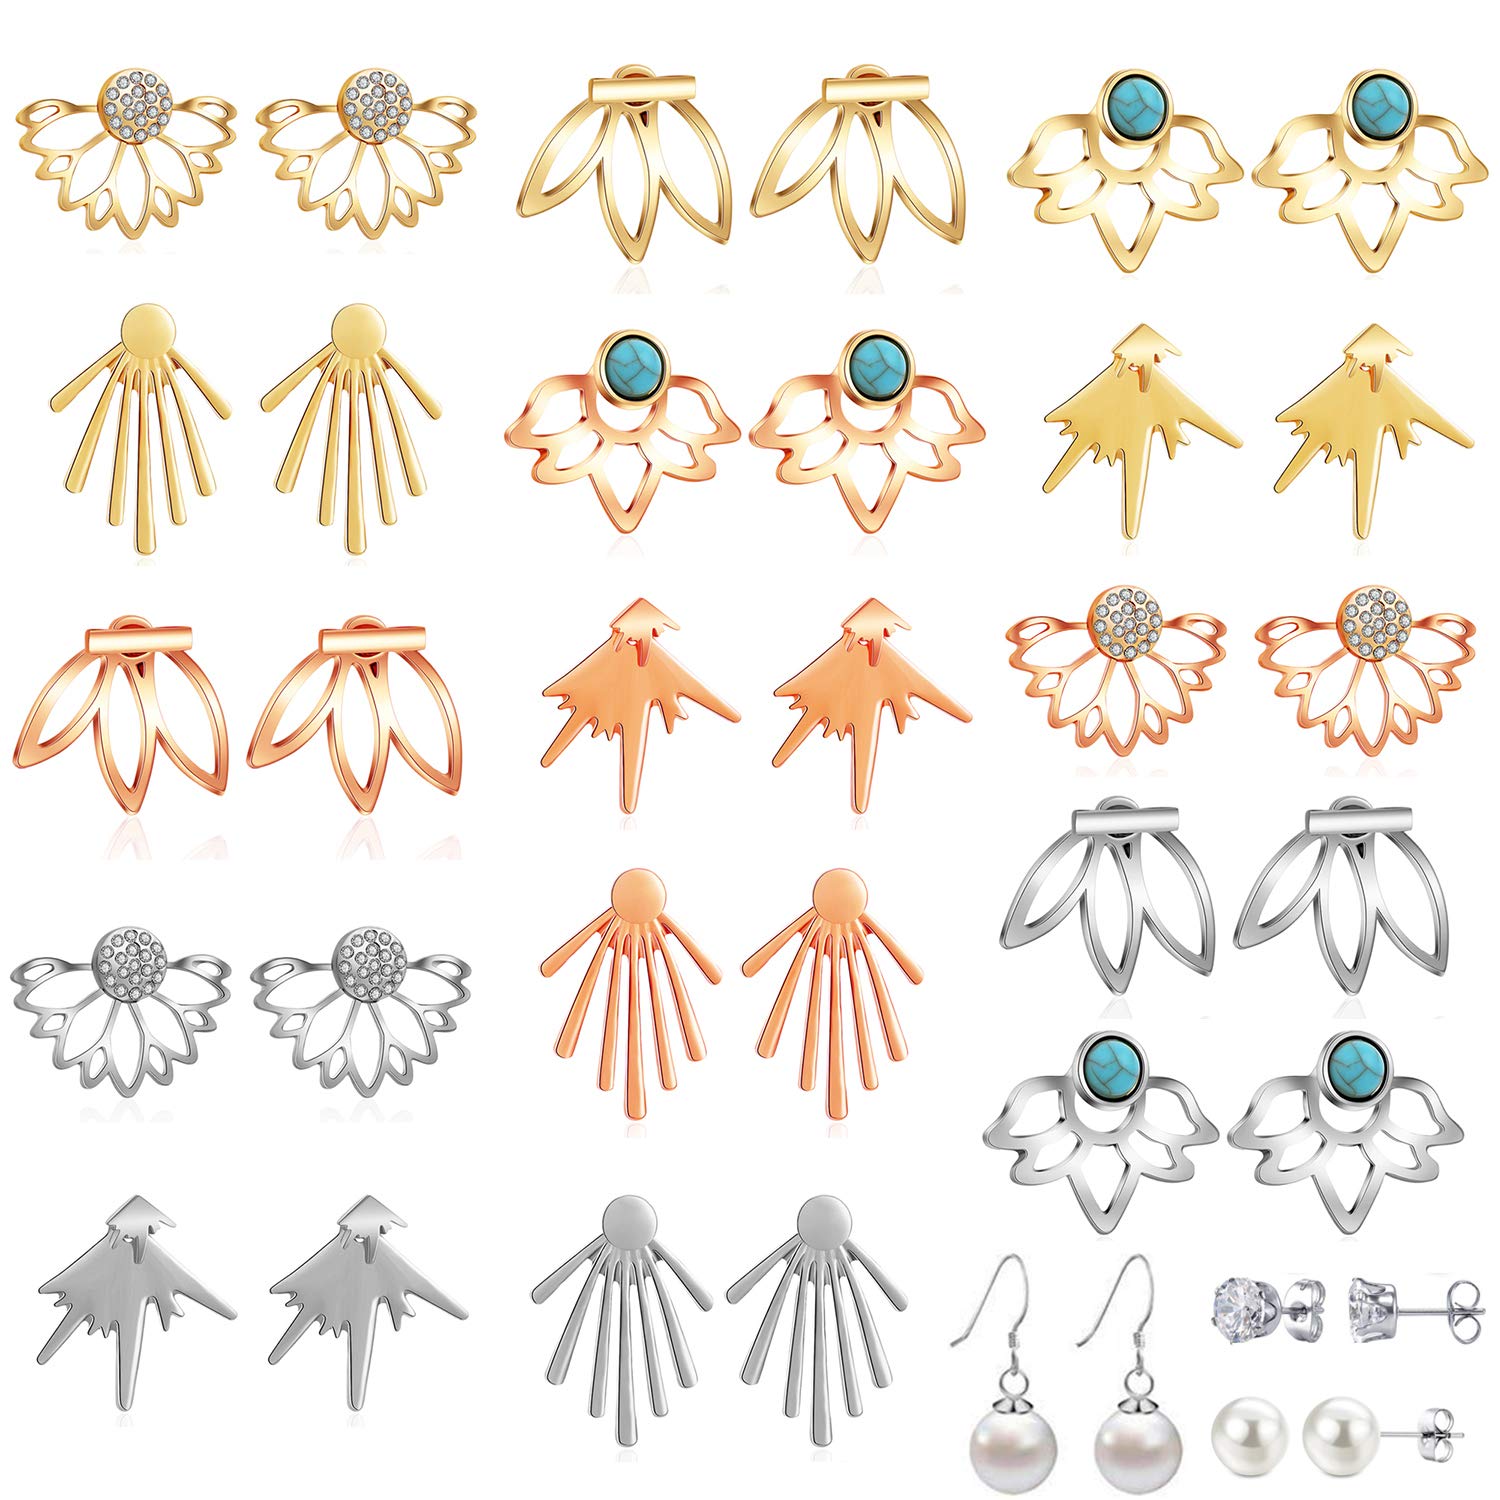 18/21 Pairs Multiple Lotus Flower Ear Jacket Earrings for Women and Girls-Minimalism CZ BarTurquoise Studs-Chic Fashion Front Back Stud Earring Set